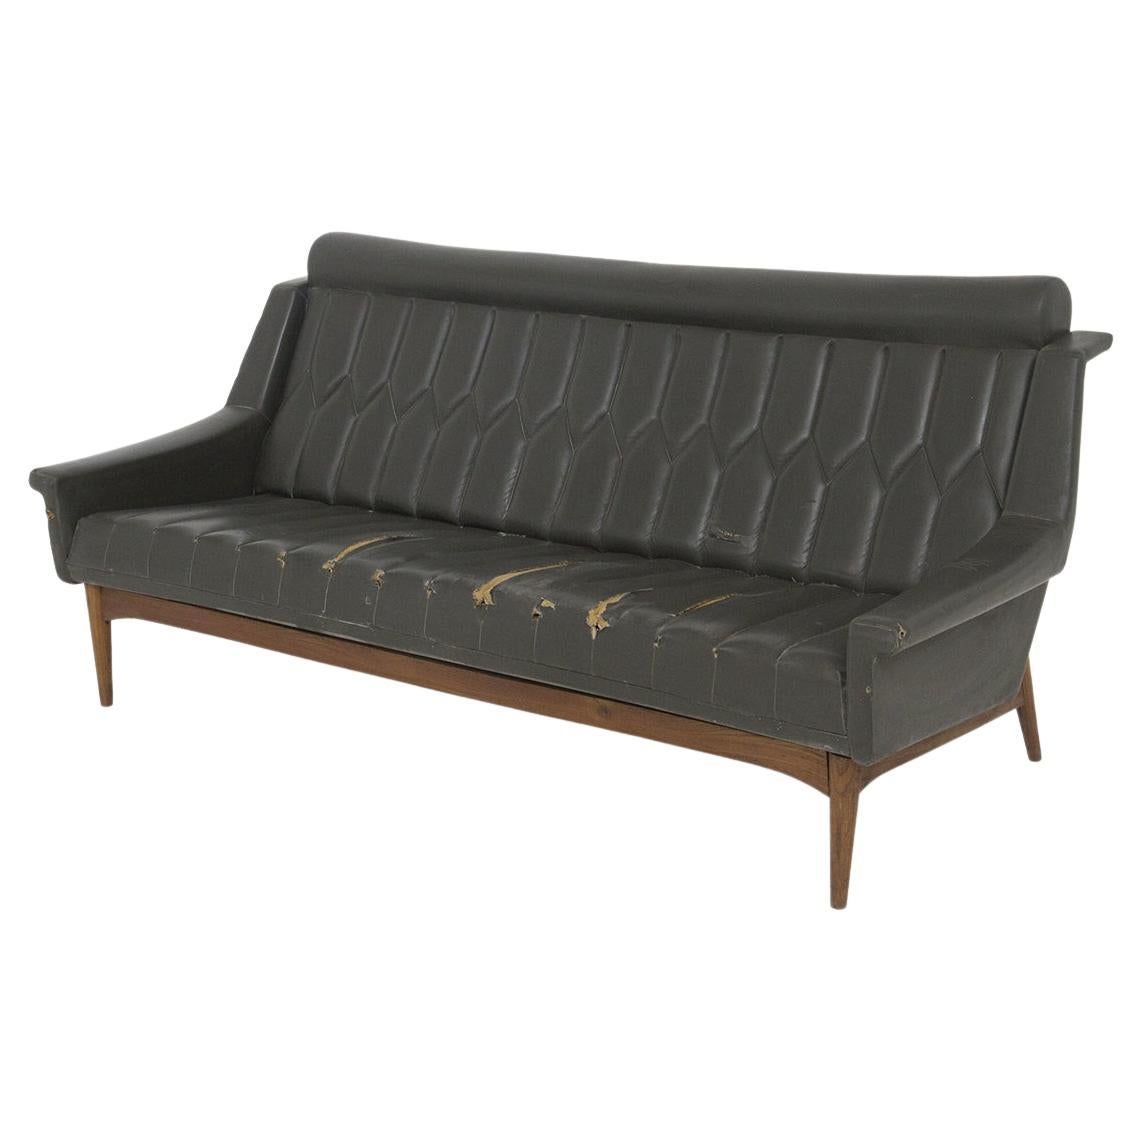 Vintage Sofa in Wood and Black Leather